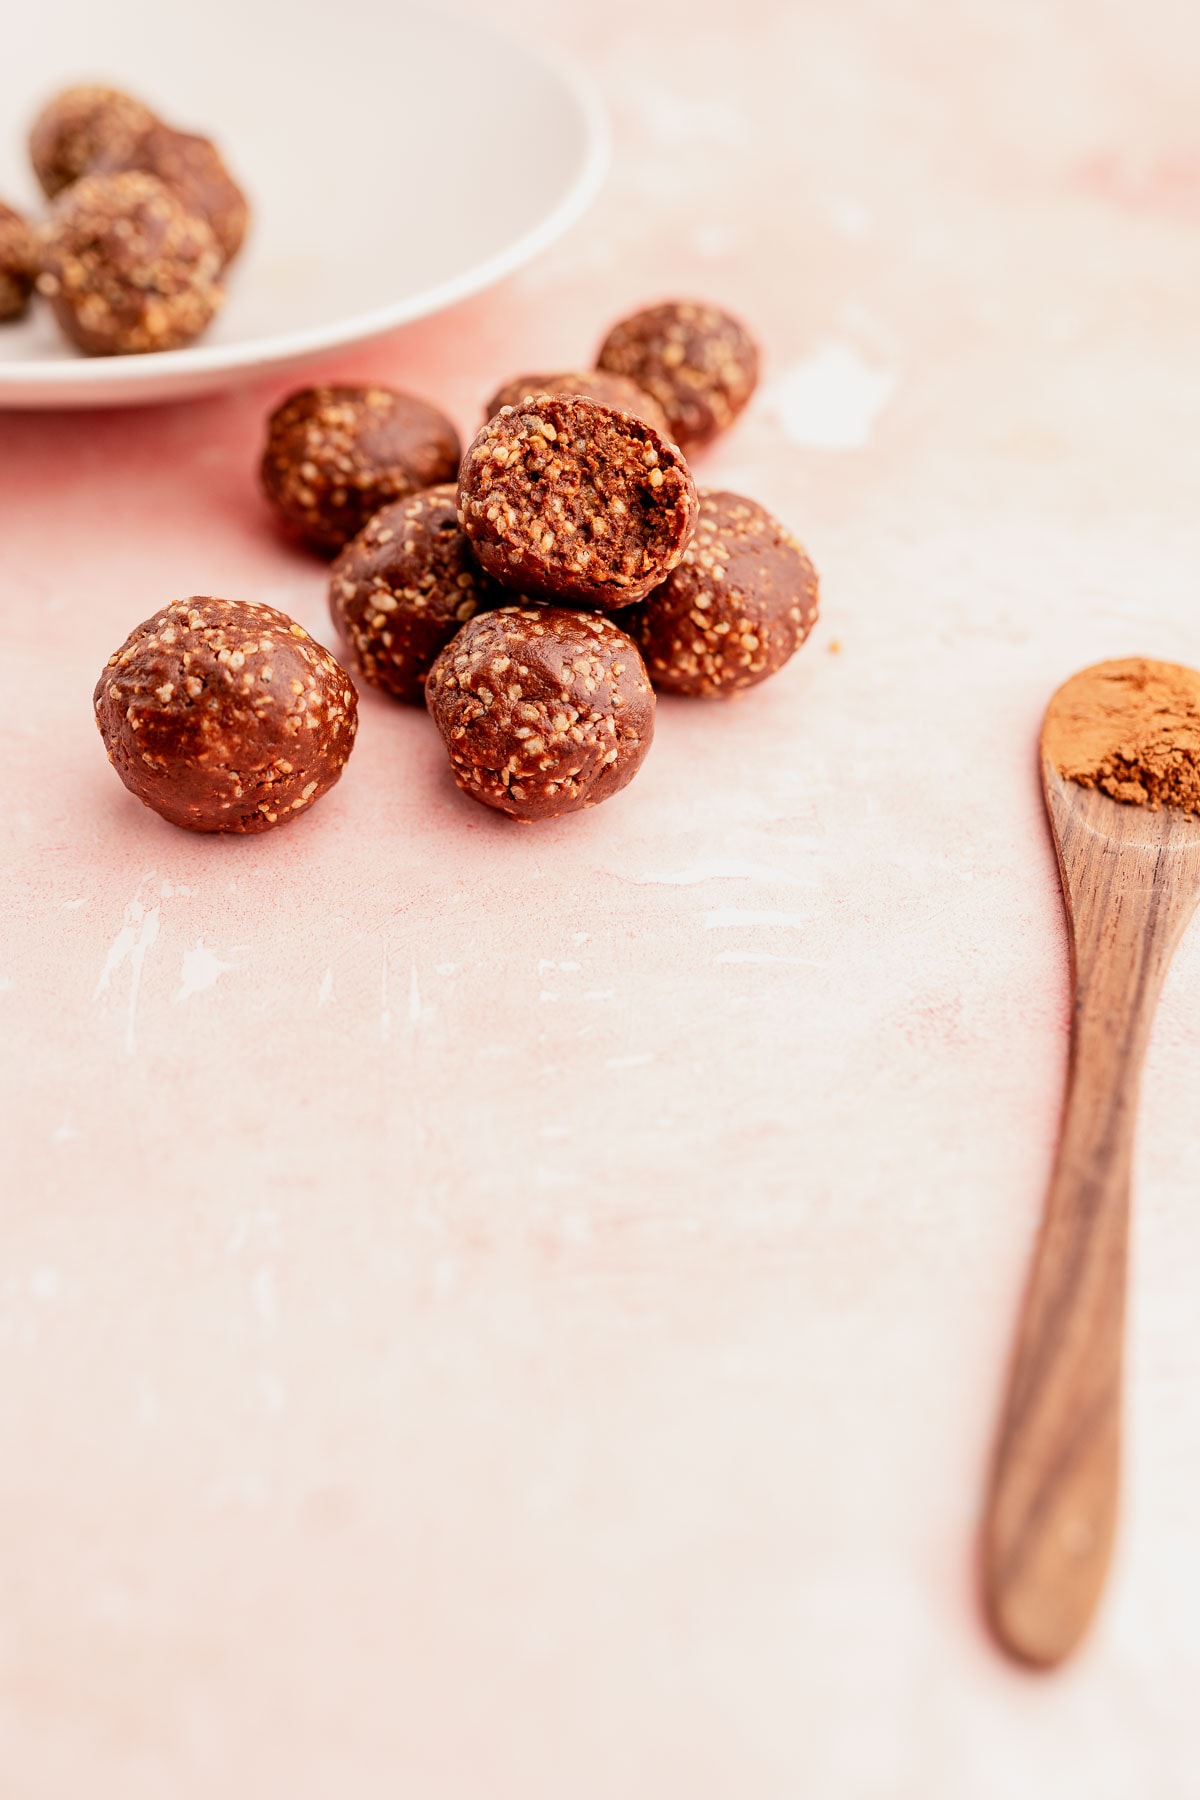 Homemade quinoa crunch bites on a pink surface with some on a white plate and a wooden spoon with cocoa powder.